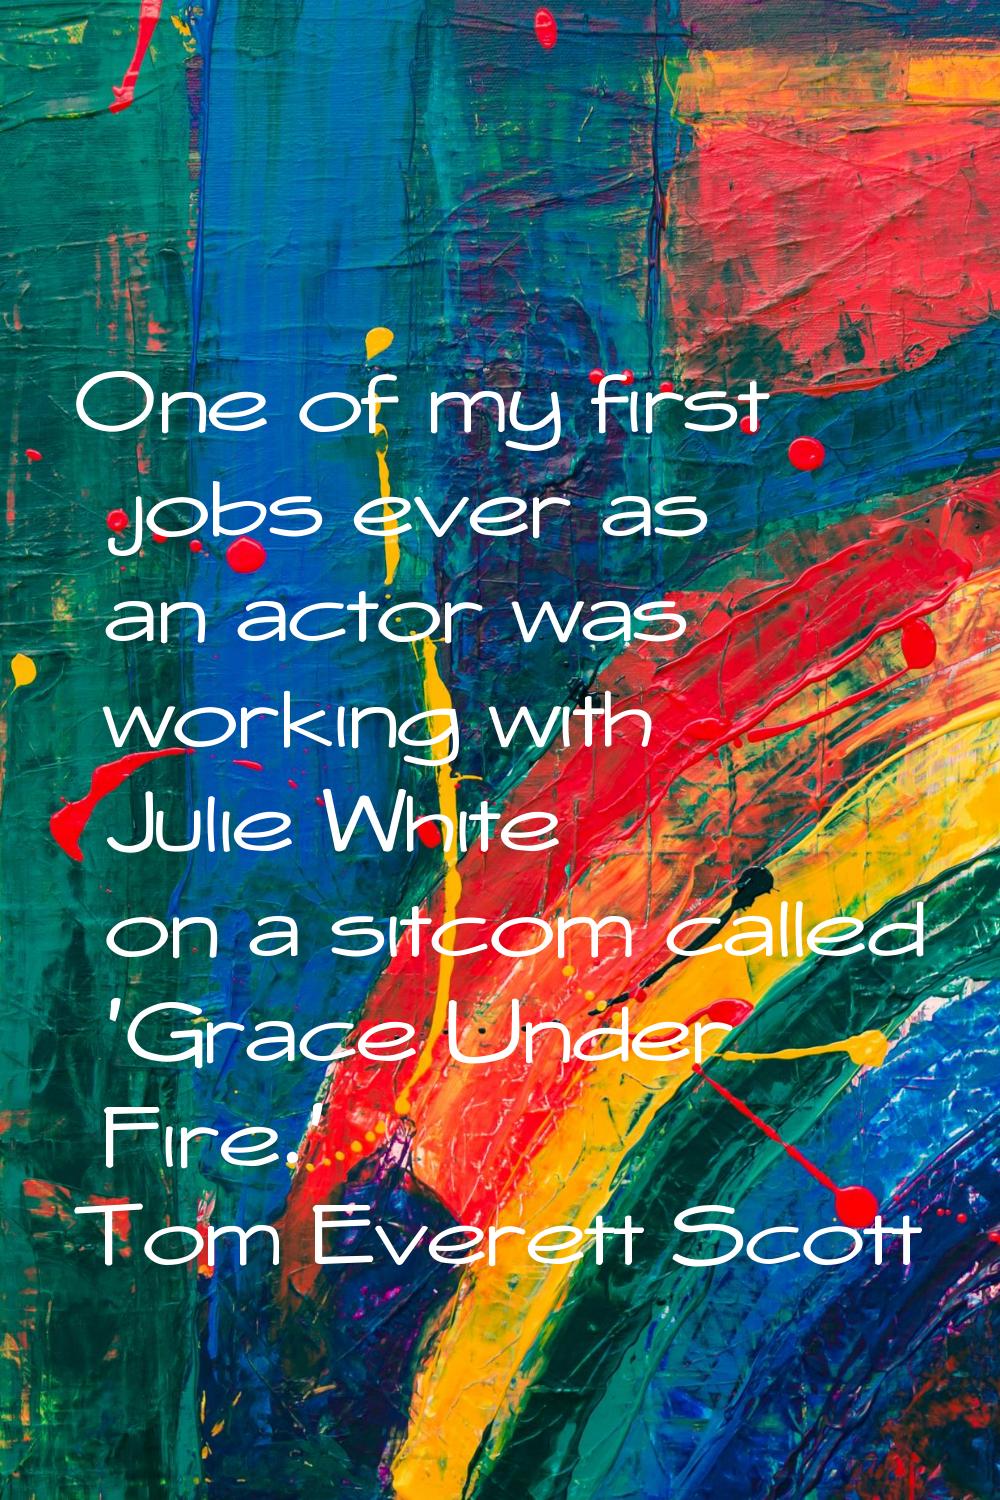 One of my first jobs ever as an actor was working with Julie White on a sitcom called 'Grace Under 